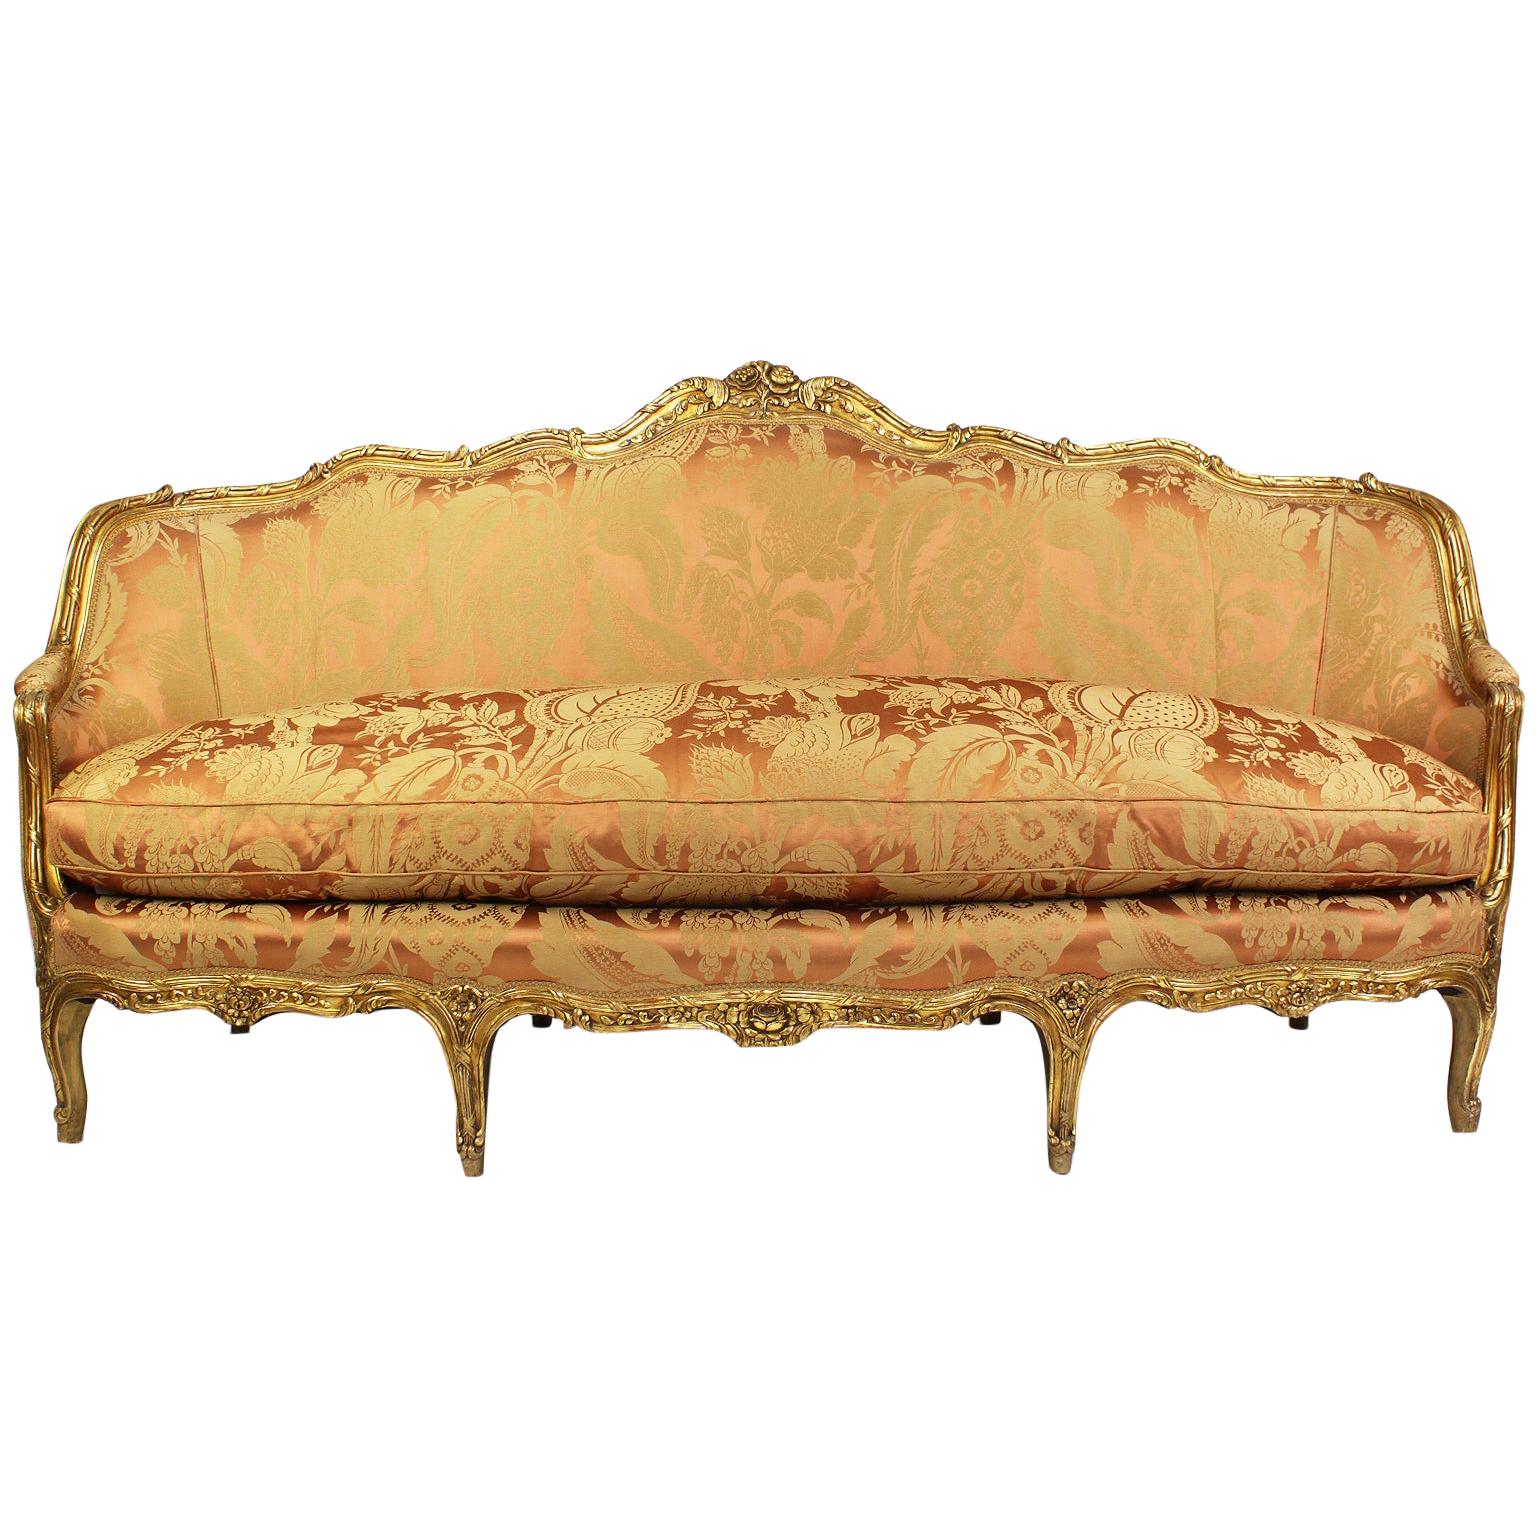 Fine Louis XV Style Giltwood Carved Bergère Settee, Sofa, Attributed to Jansen